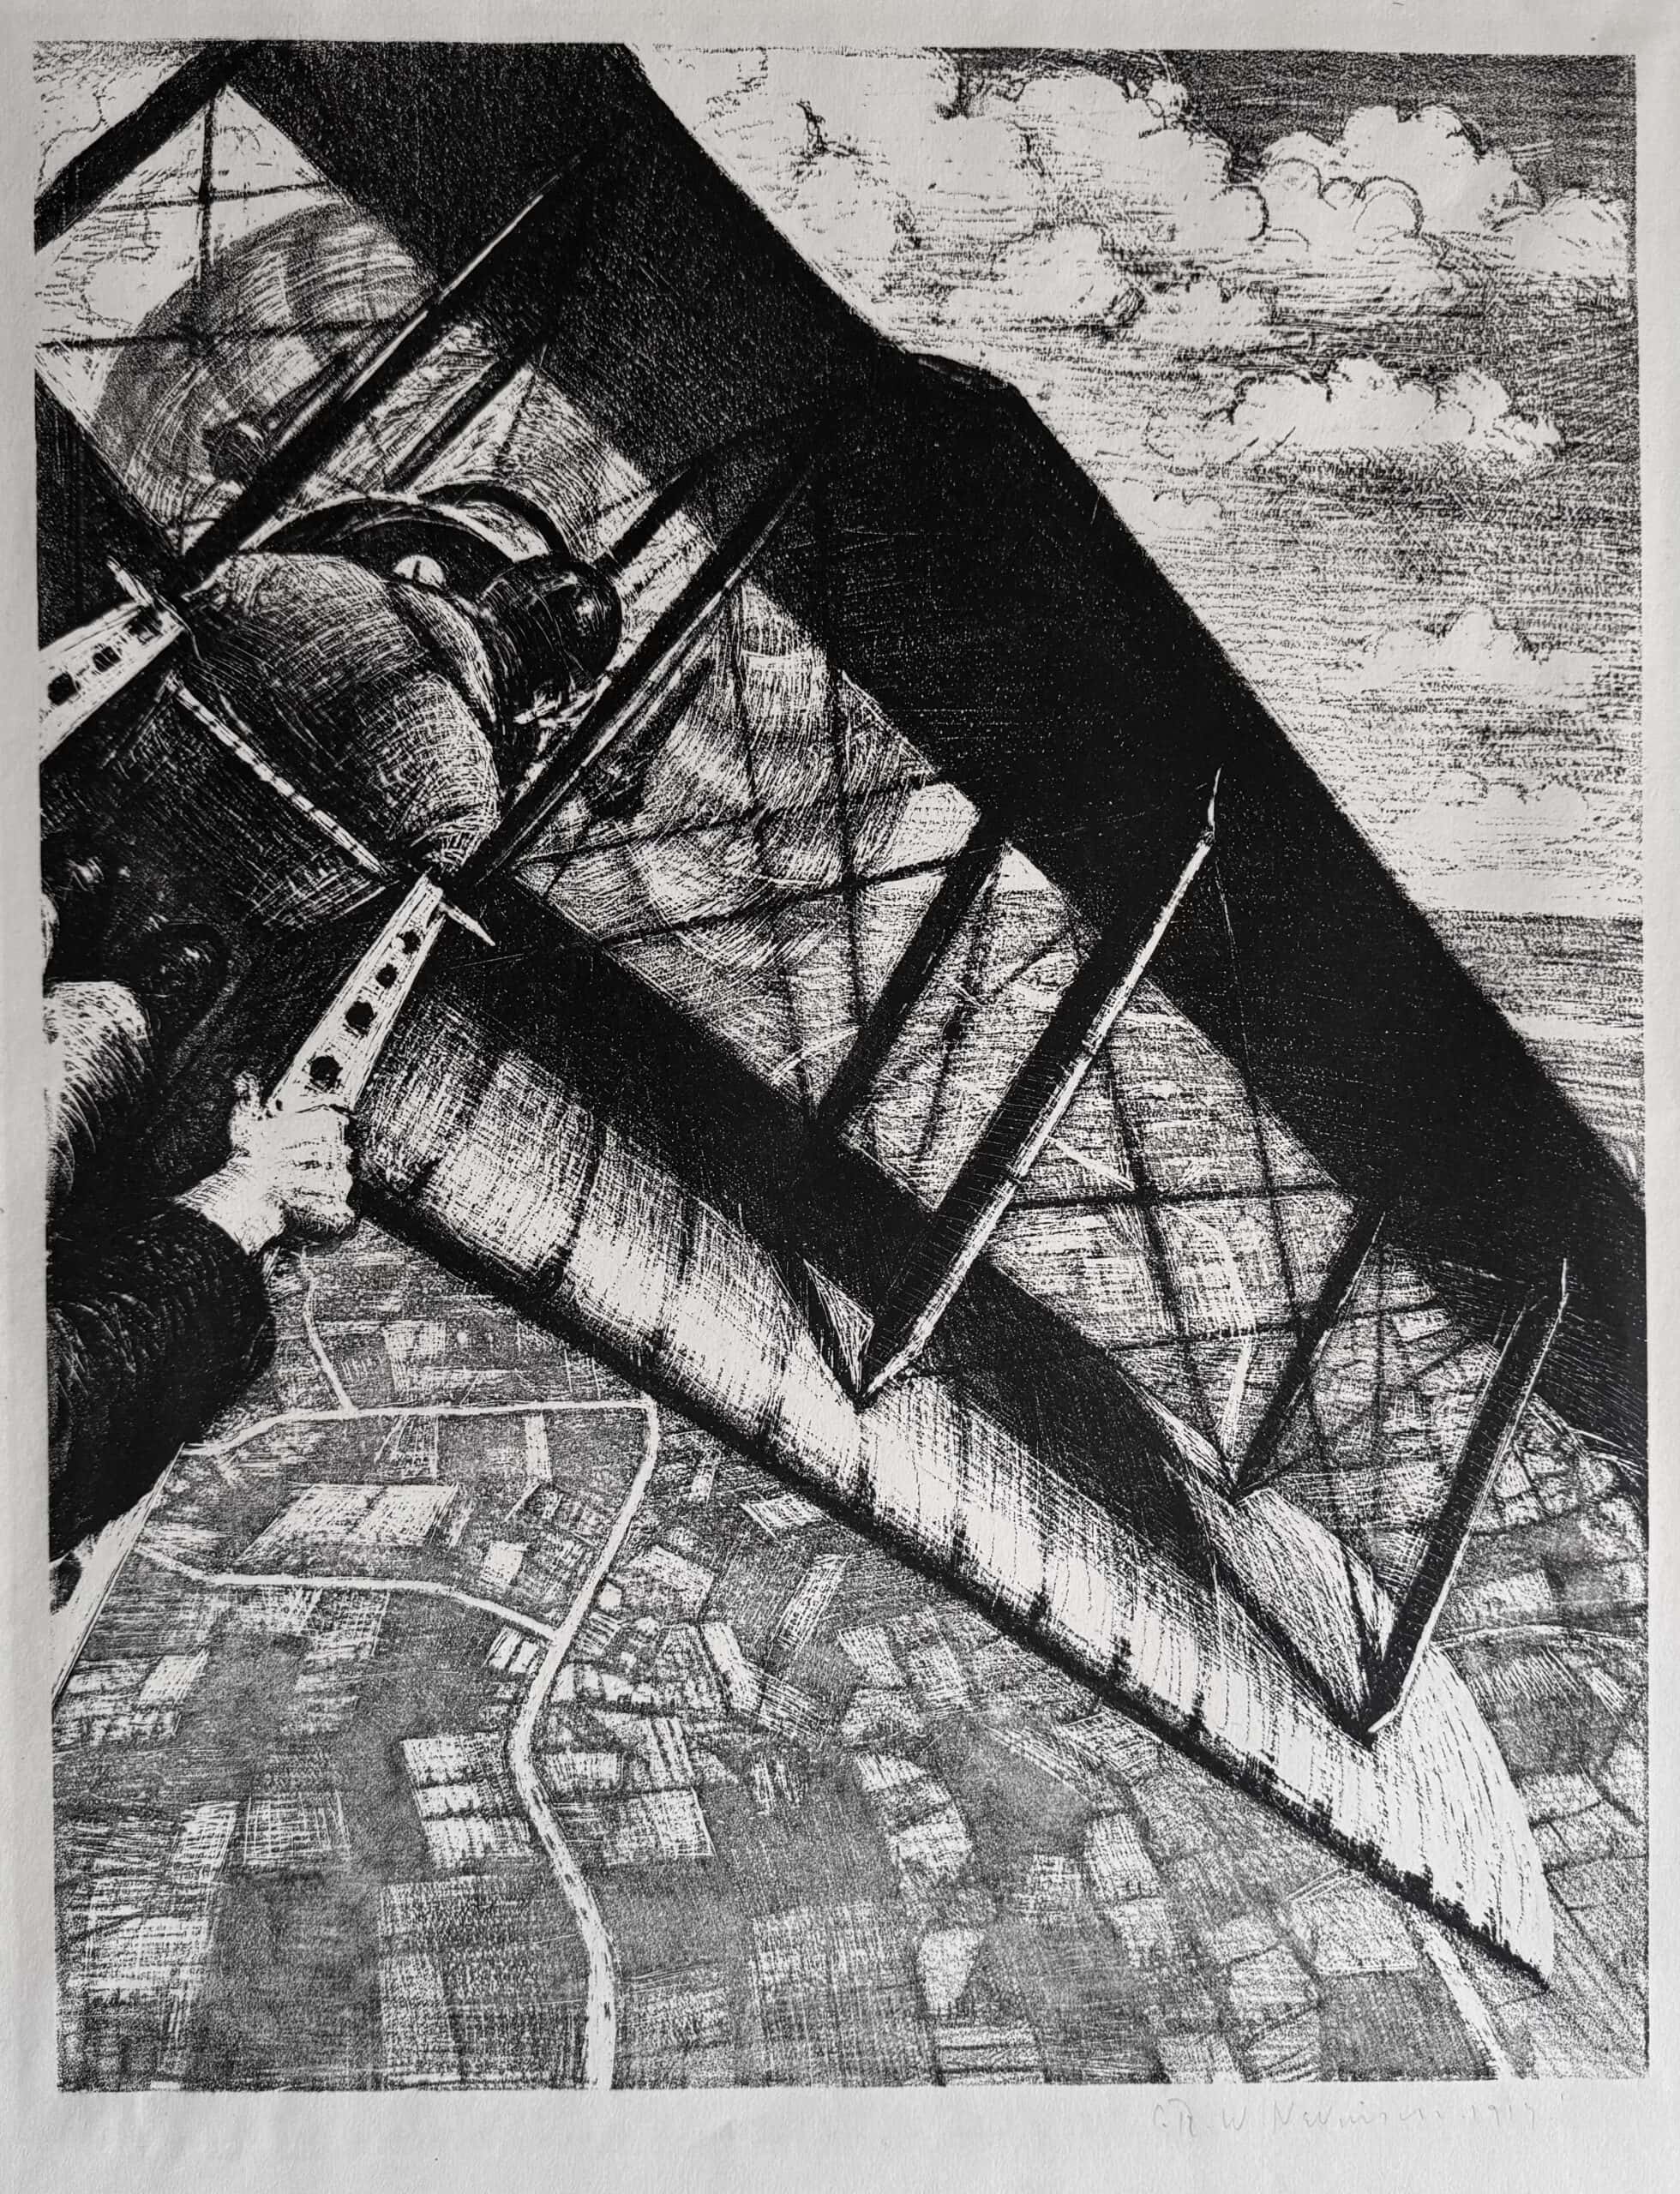 Image of Christopher Nevinson's "Banking at 4,000 feet" lithograph, which depicts a plane in flight.